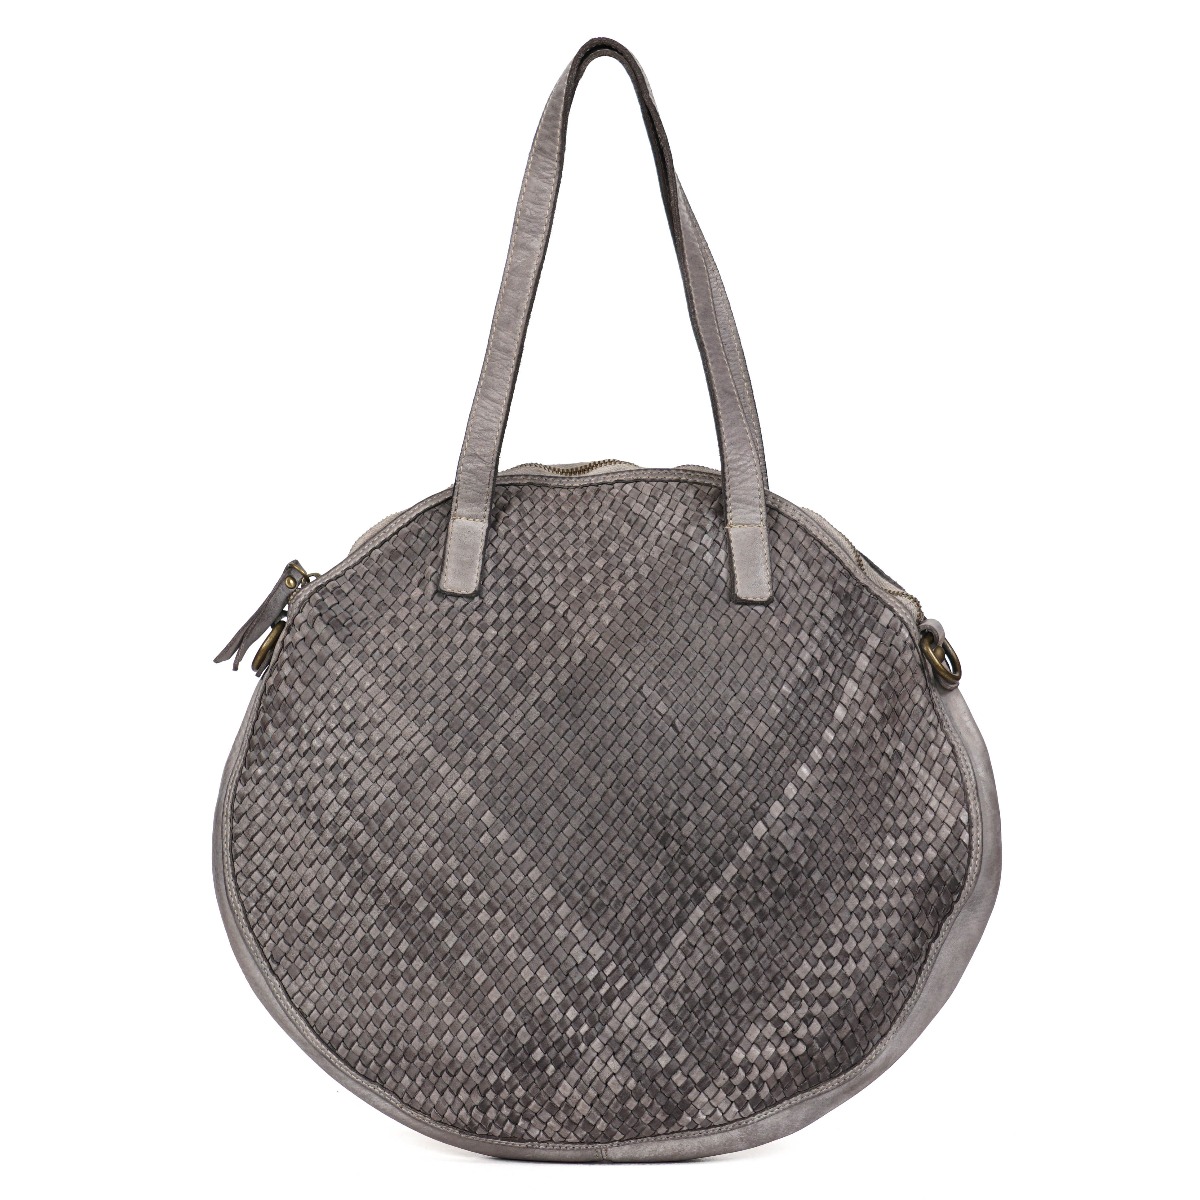 Woven leather Premium line round leather tote